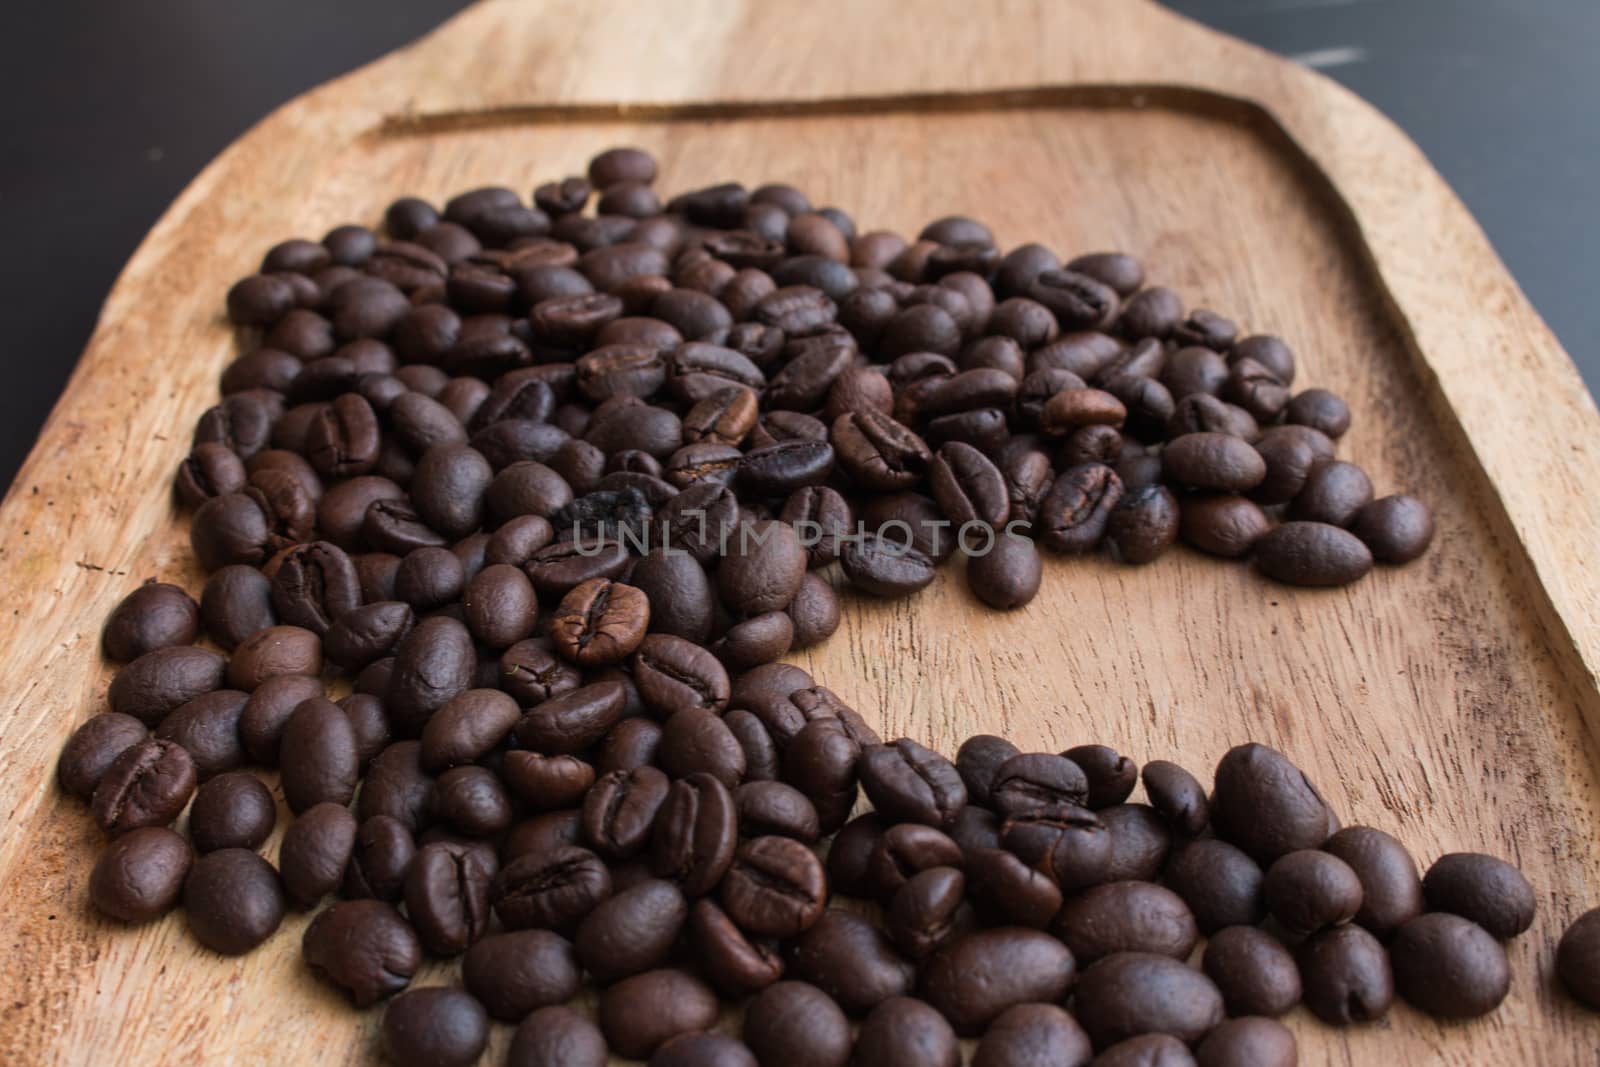 Coffee beans on the wooden floor